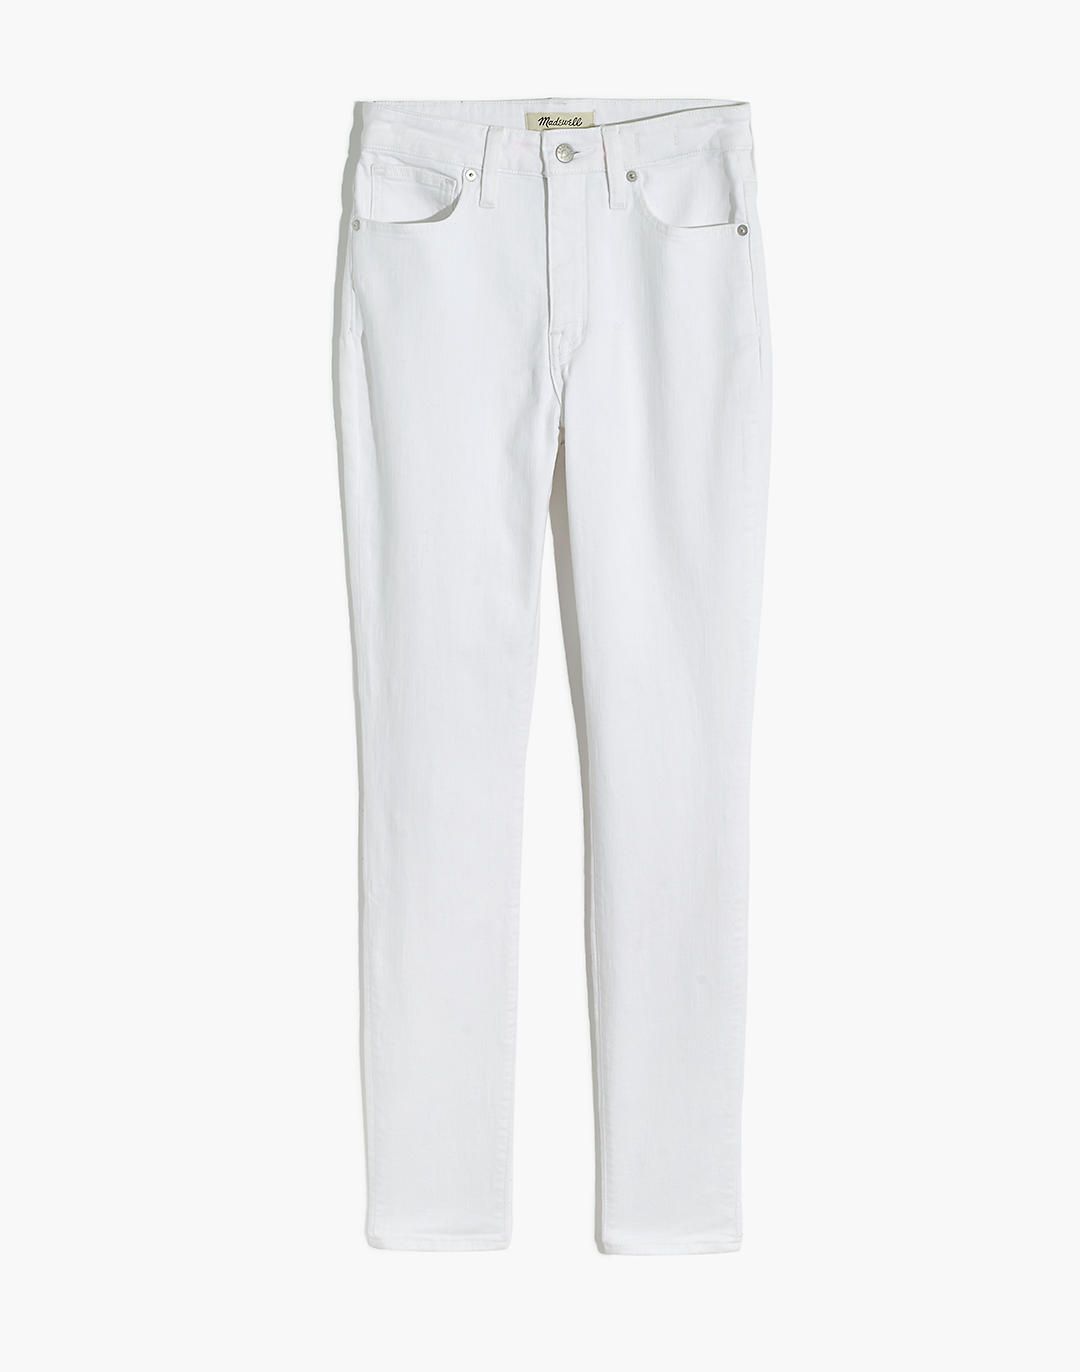 Petite Curvy High-Rise Skinny Jeans in Pure White | Madewell